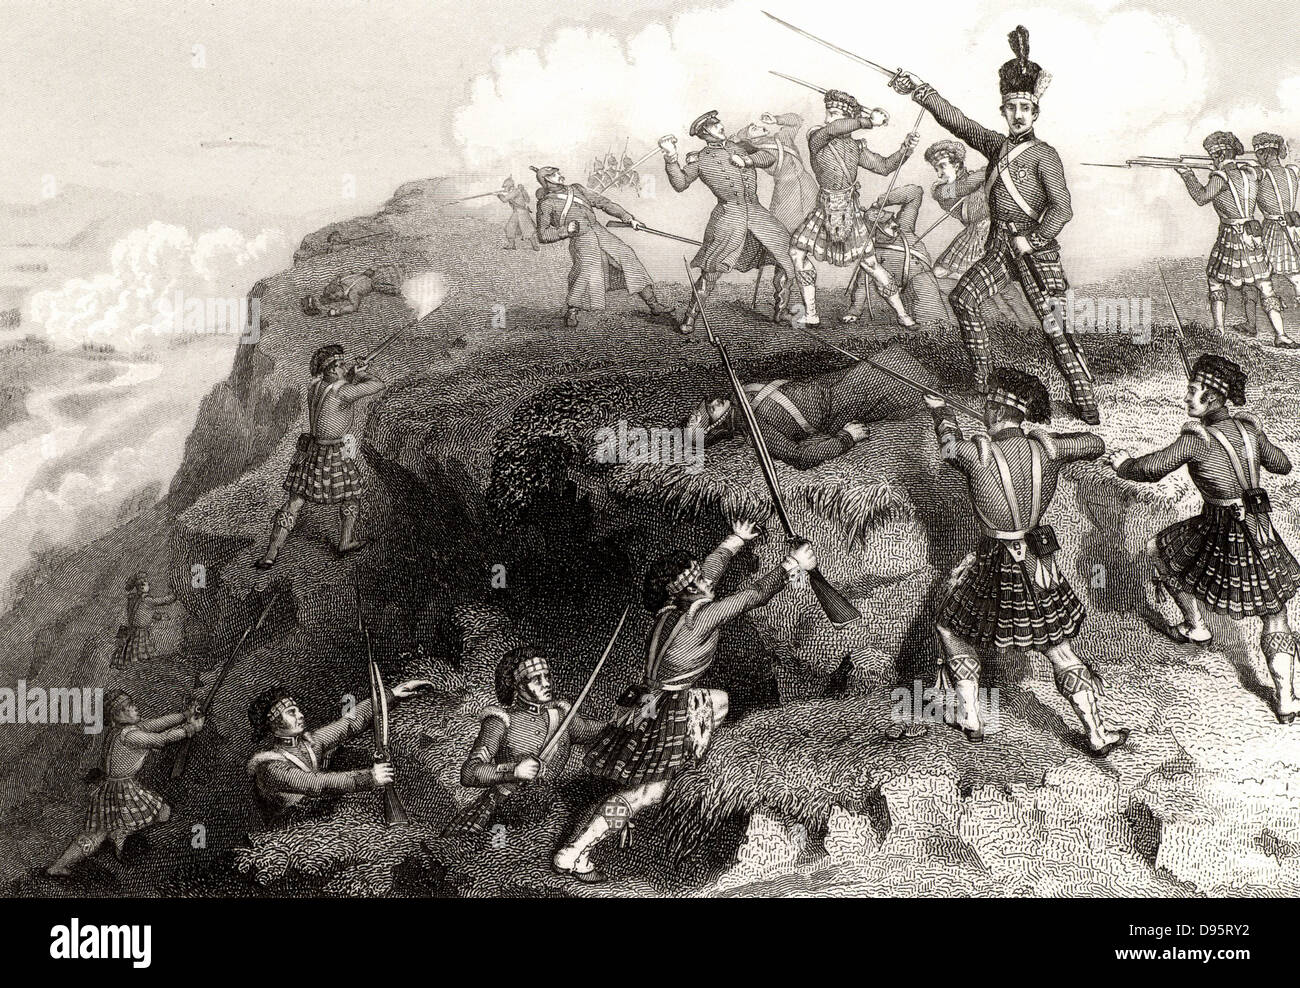 Crimean (Russo-Turkish) War 1853-1856. The Battle of Alma, 20 September 1854: The Highlanders attacking the Russian redoubt led by General Sir Colin Campbell (1792-1863) shown in tartan trews and wearing a Scottish bonnet urging on his kilted troops.  The Allies (Britain, France and Turkey) defeated the Russians.  Engraving c1860. Stock Photo